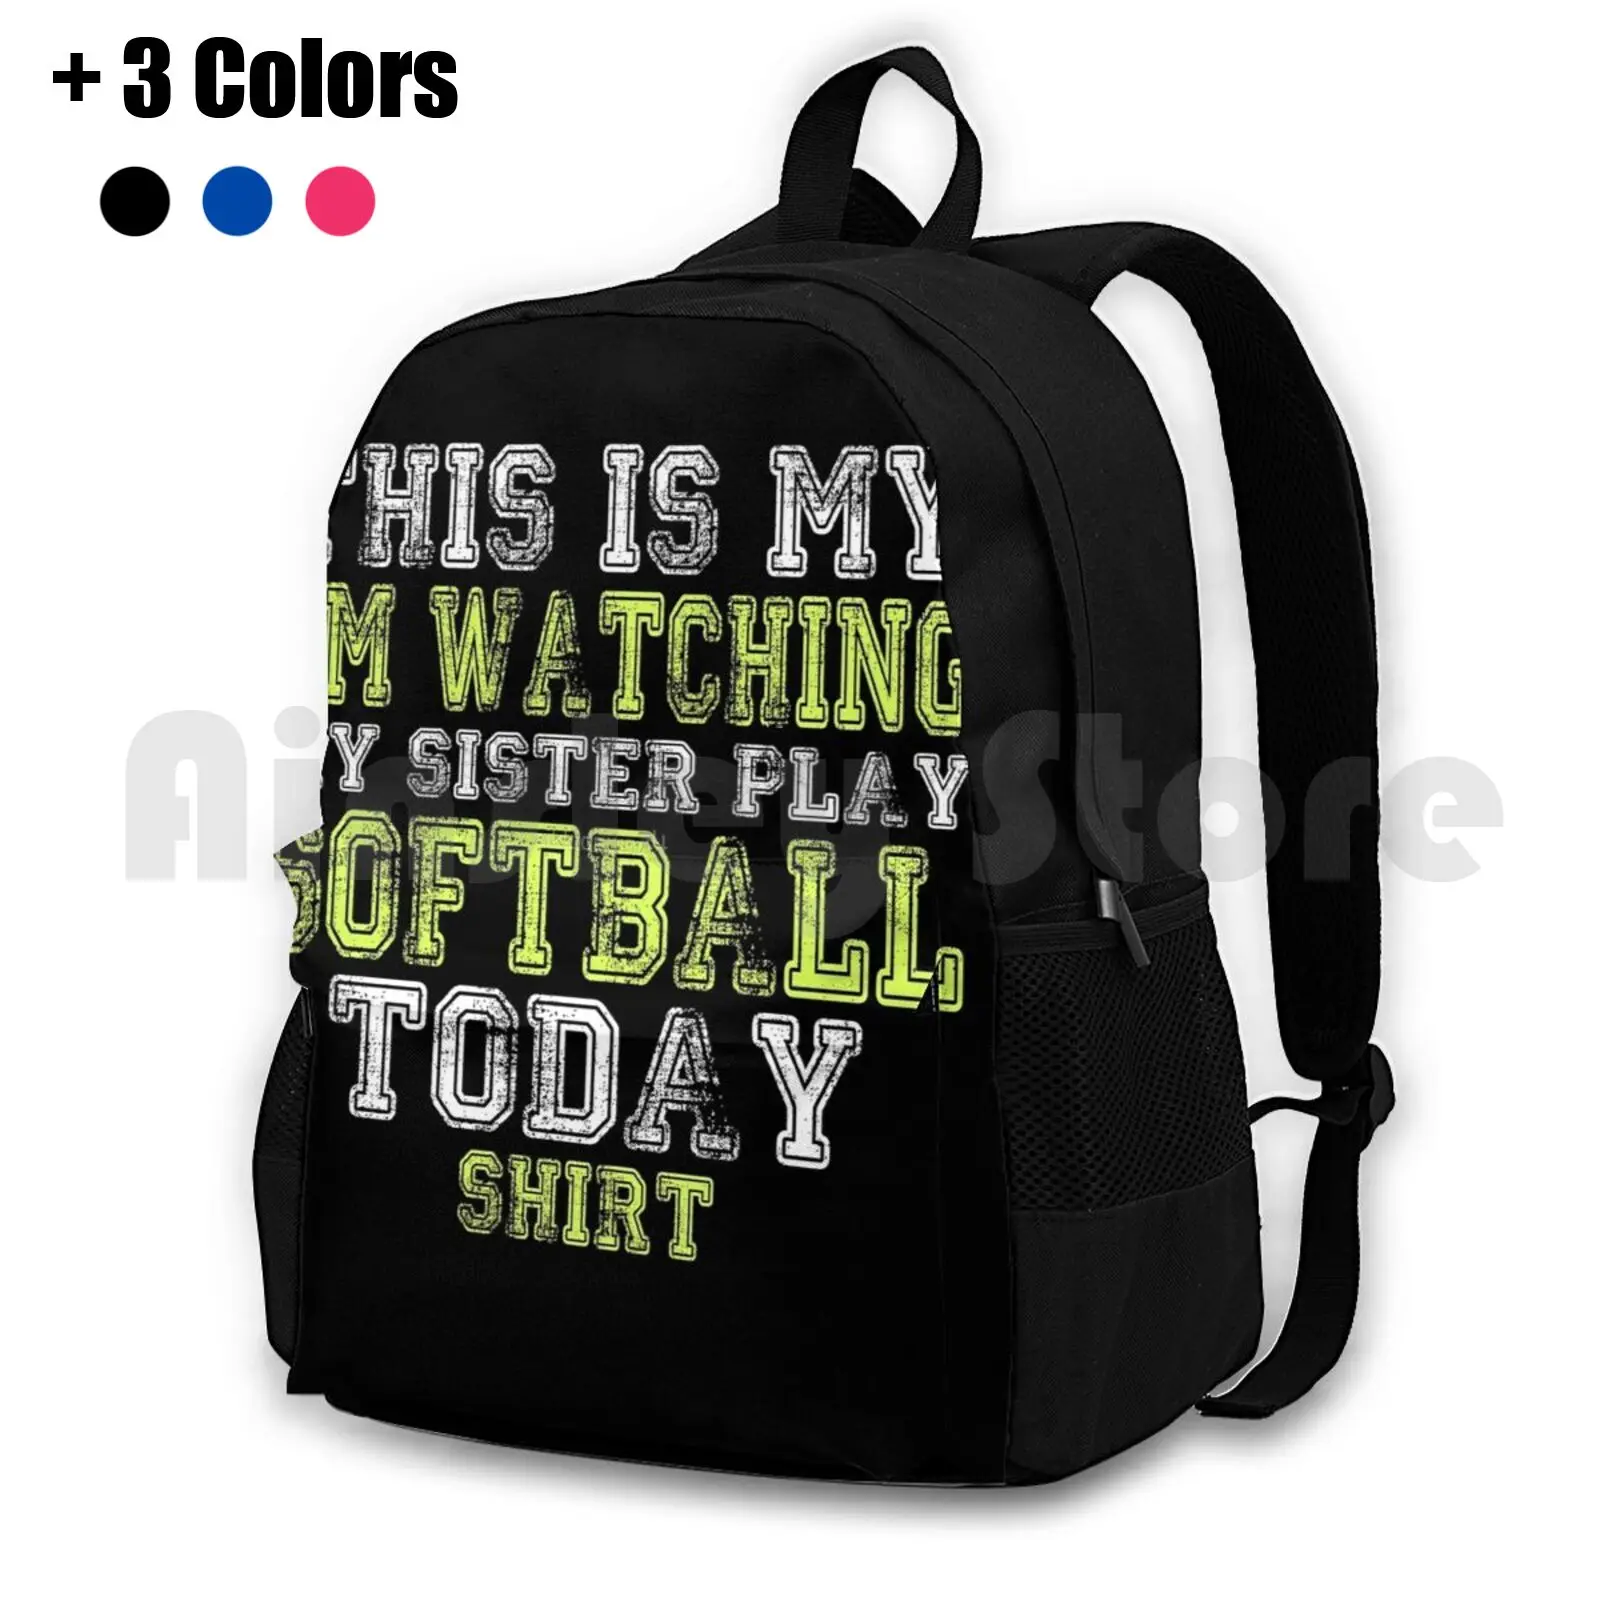 

This Is My I'M Watching My Sister Play Softball Today Design Product Outdoor Hiking Backpack Waterproof Camping Travel Softball